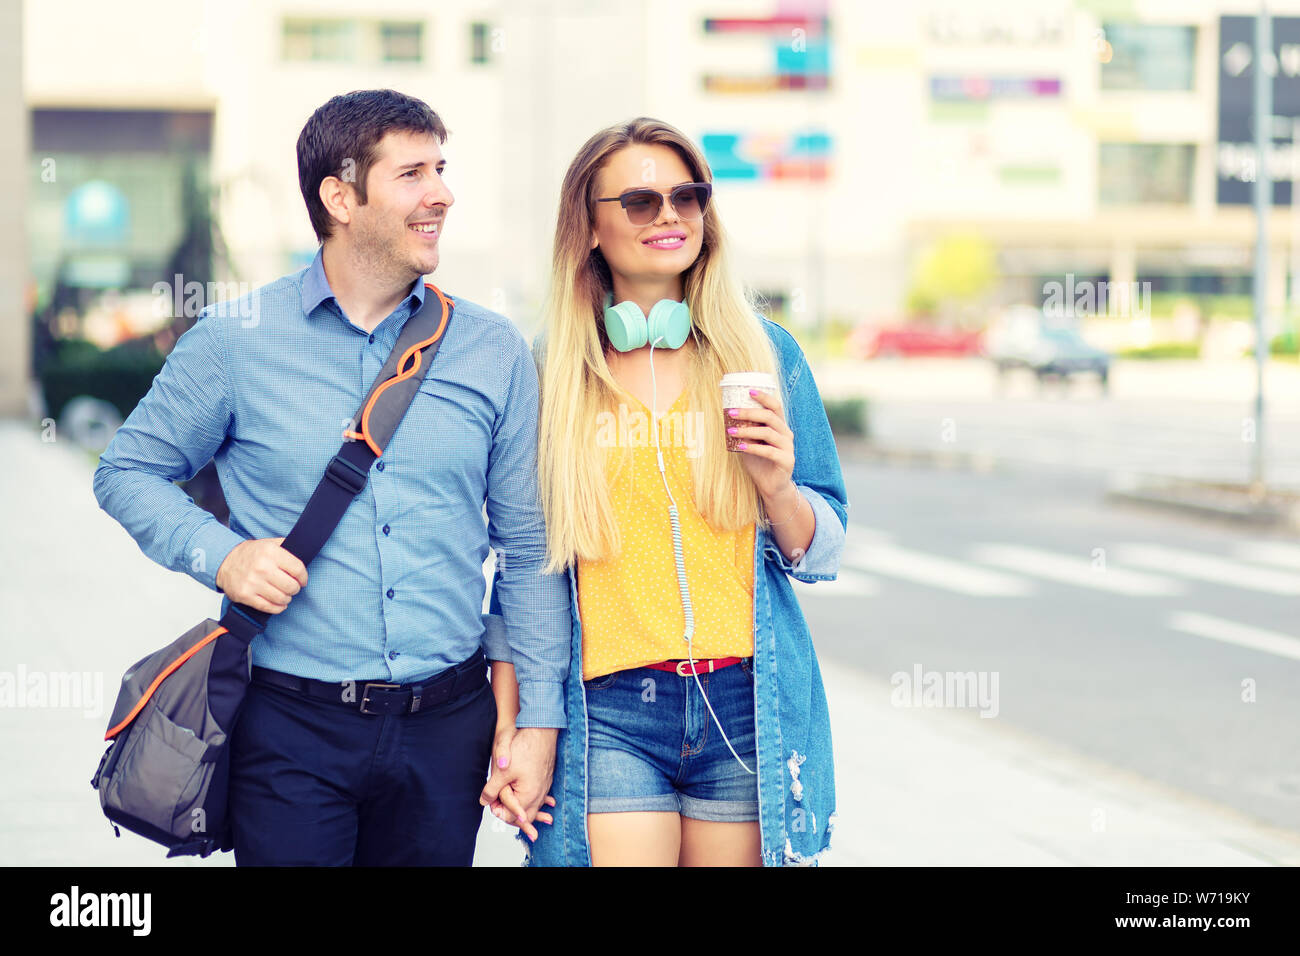 In love modern couple walking on street holding hands Stock Photo